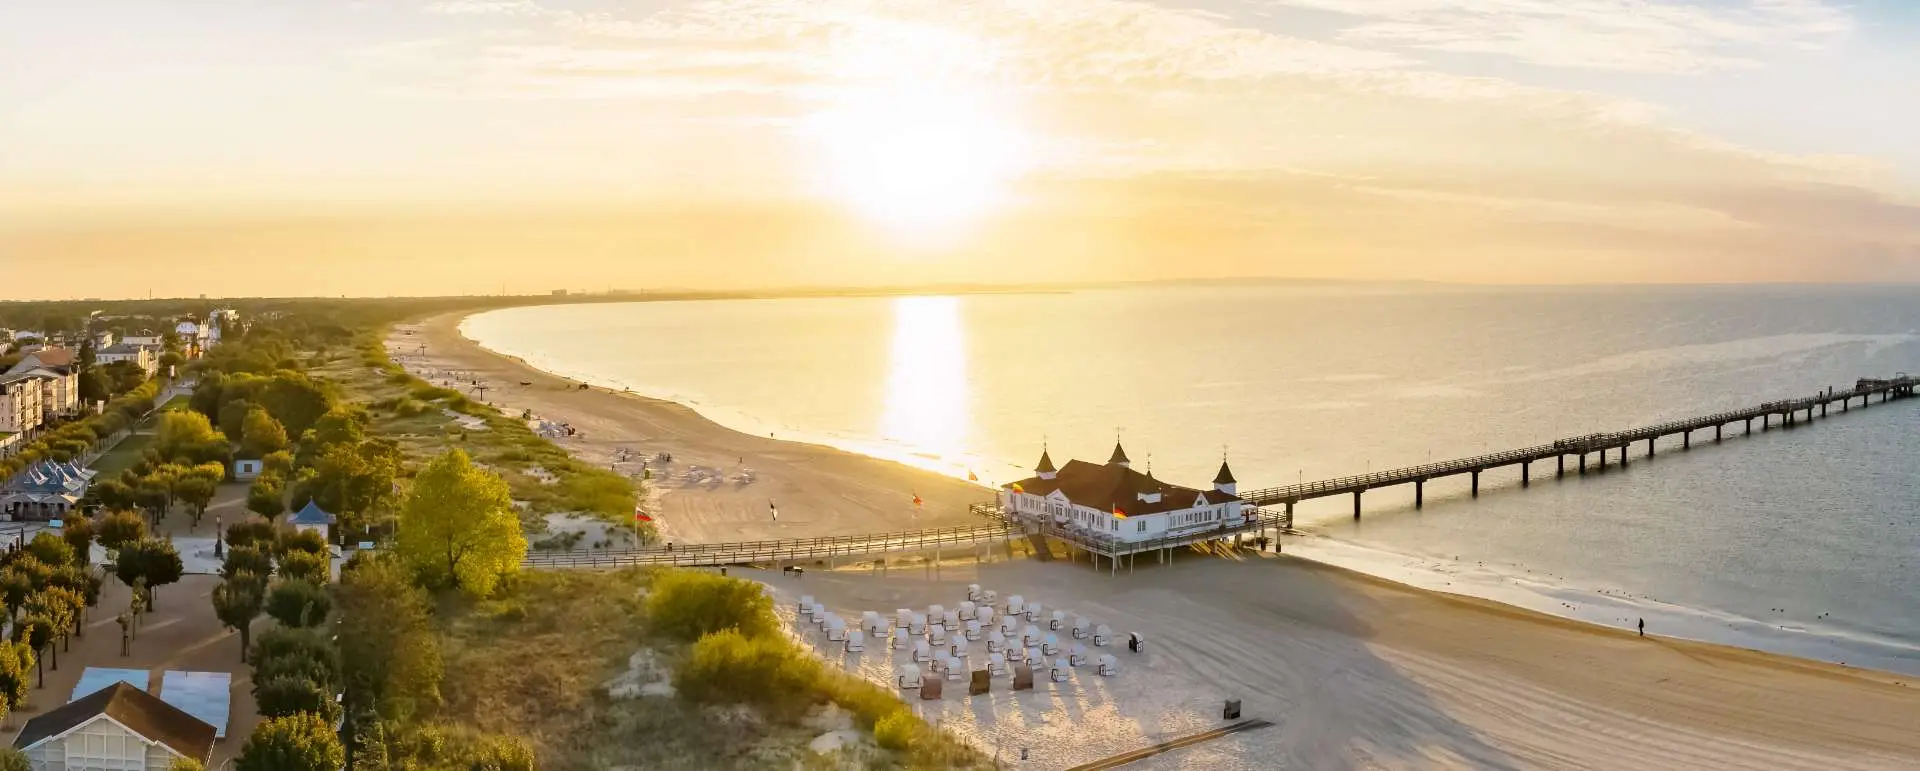 Usedom - the destination for exhibition hotels